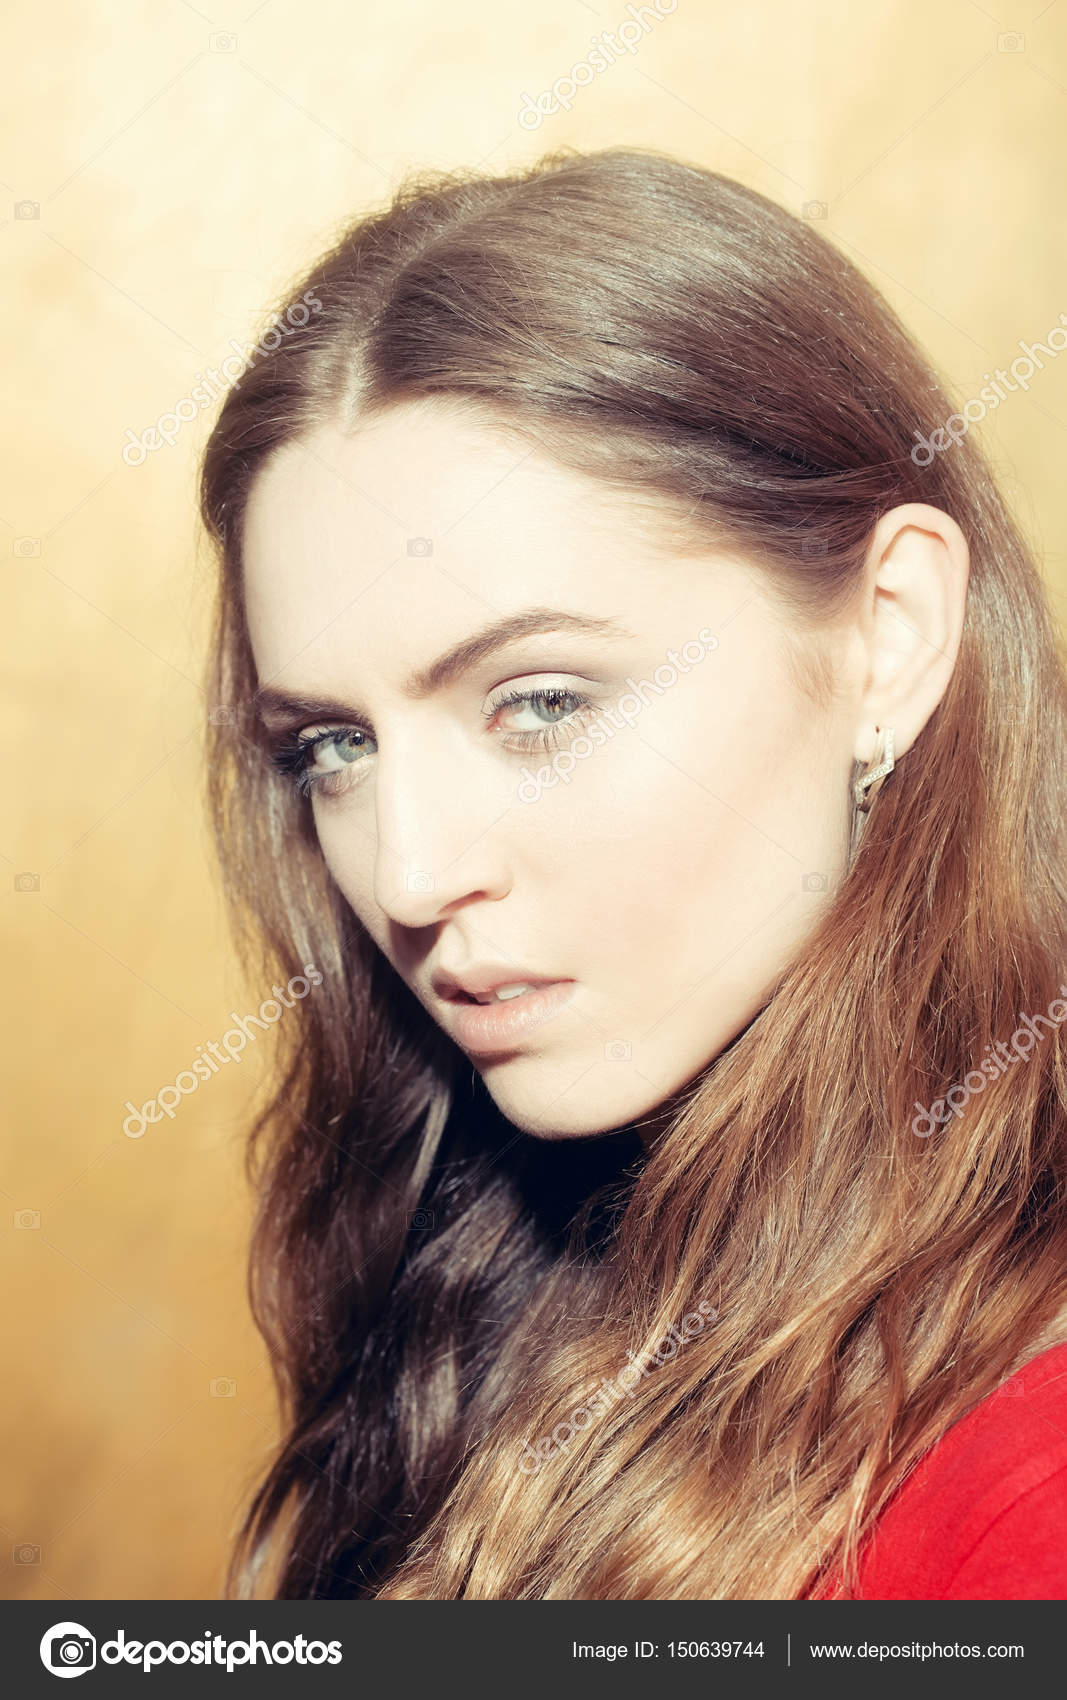 Girl With Grey Eyes Pretty Girl With Grey Eyes And Natural Makeup Stock Photo C Tverdohlib Com 150639744